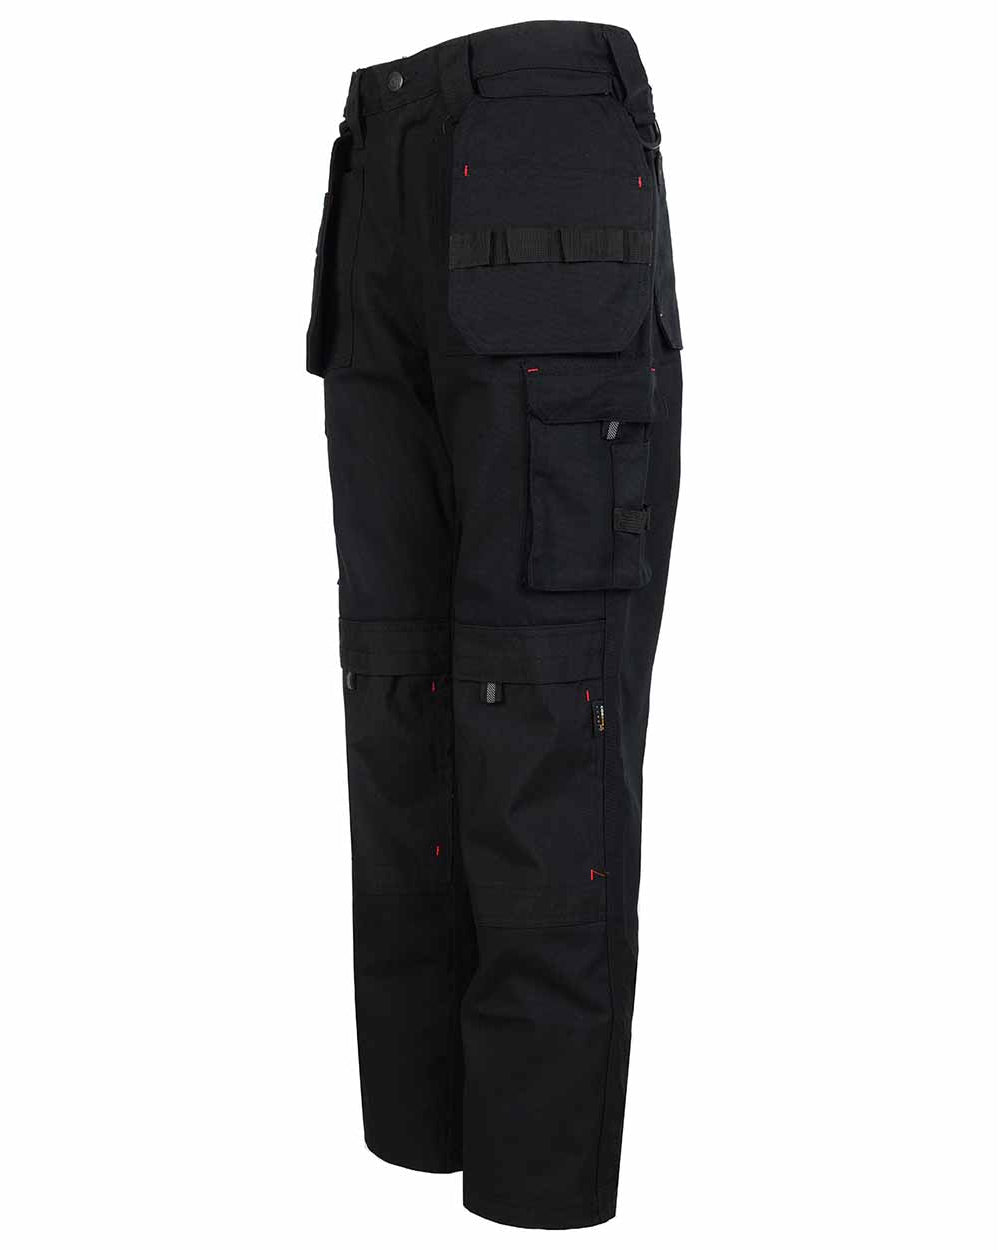 Black Coloured TuffStuff Extreme Work Trousers On A White Background 